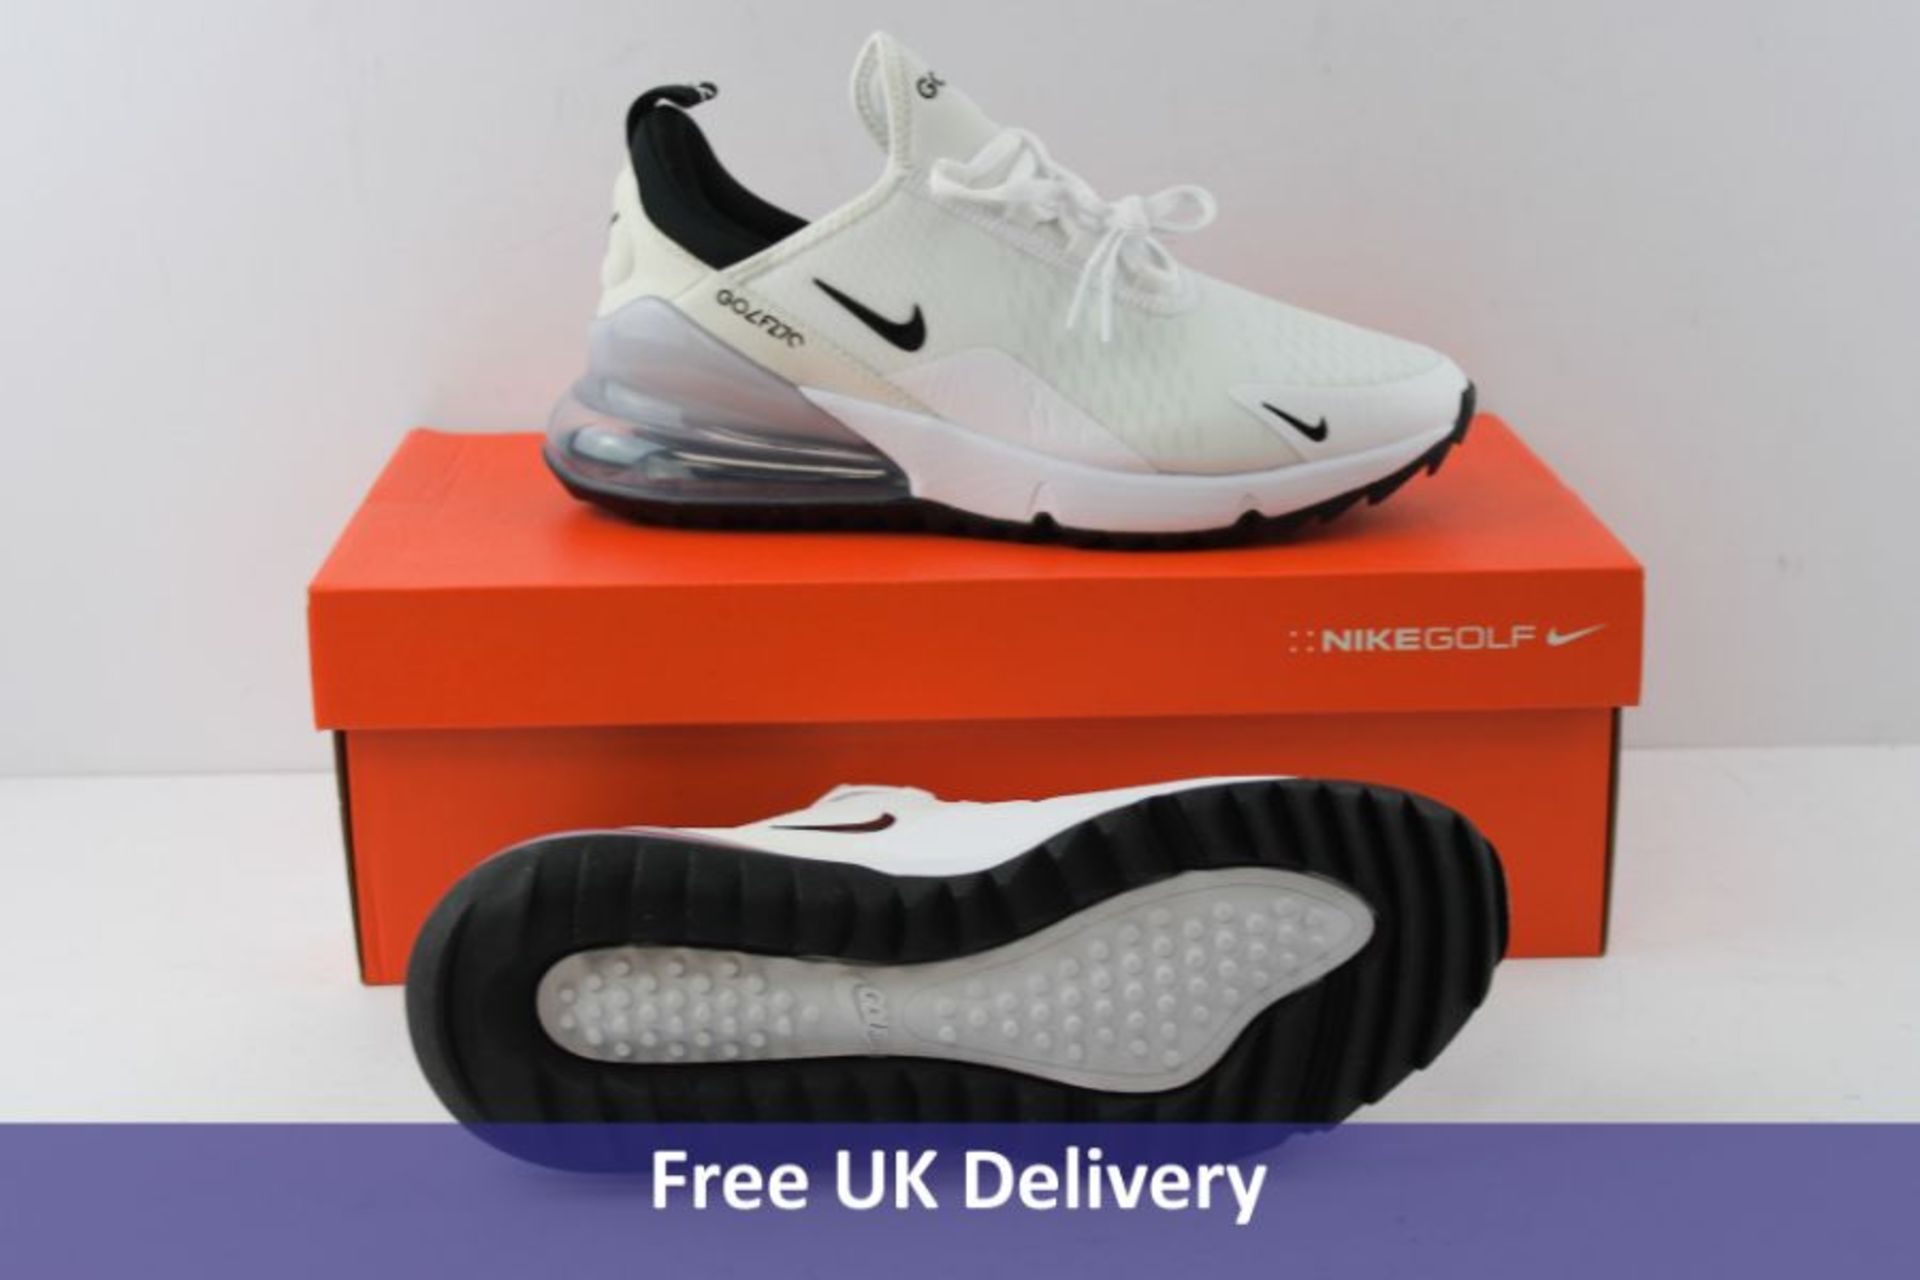 Nike Air Max Unisex 270G Golf Trainers, White and Black, UK 6.5